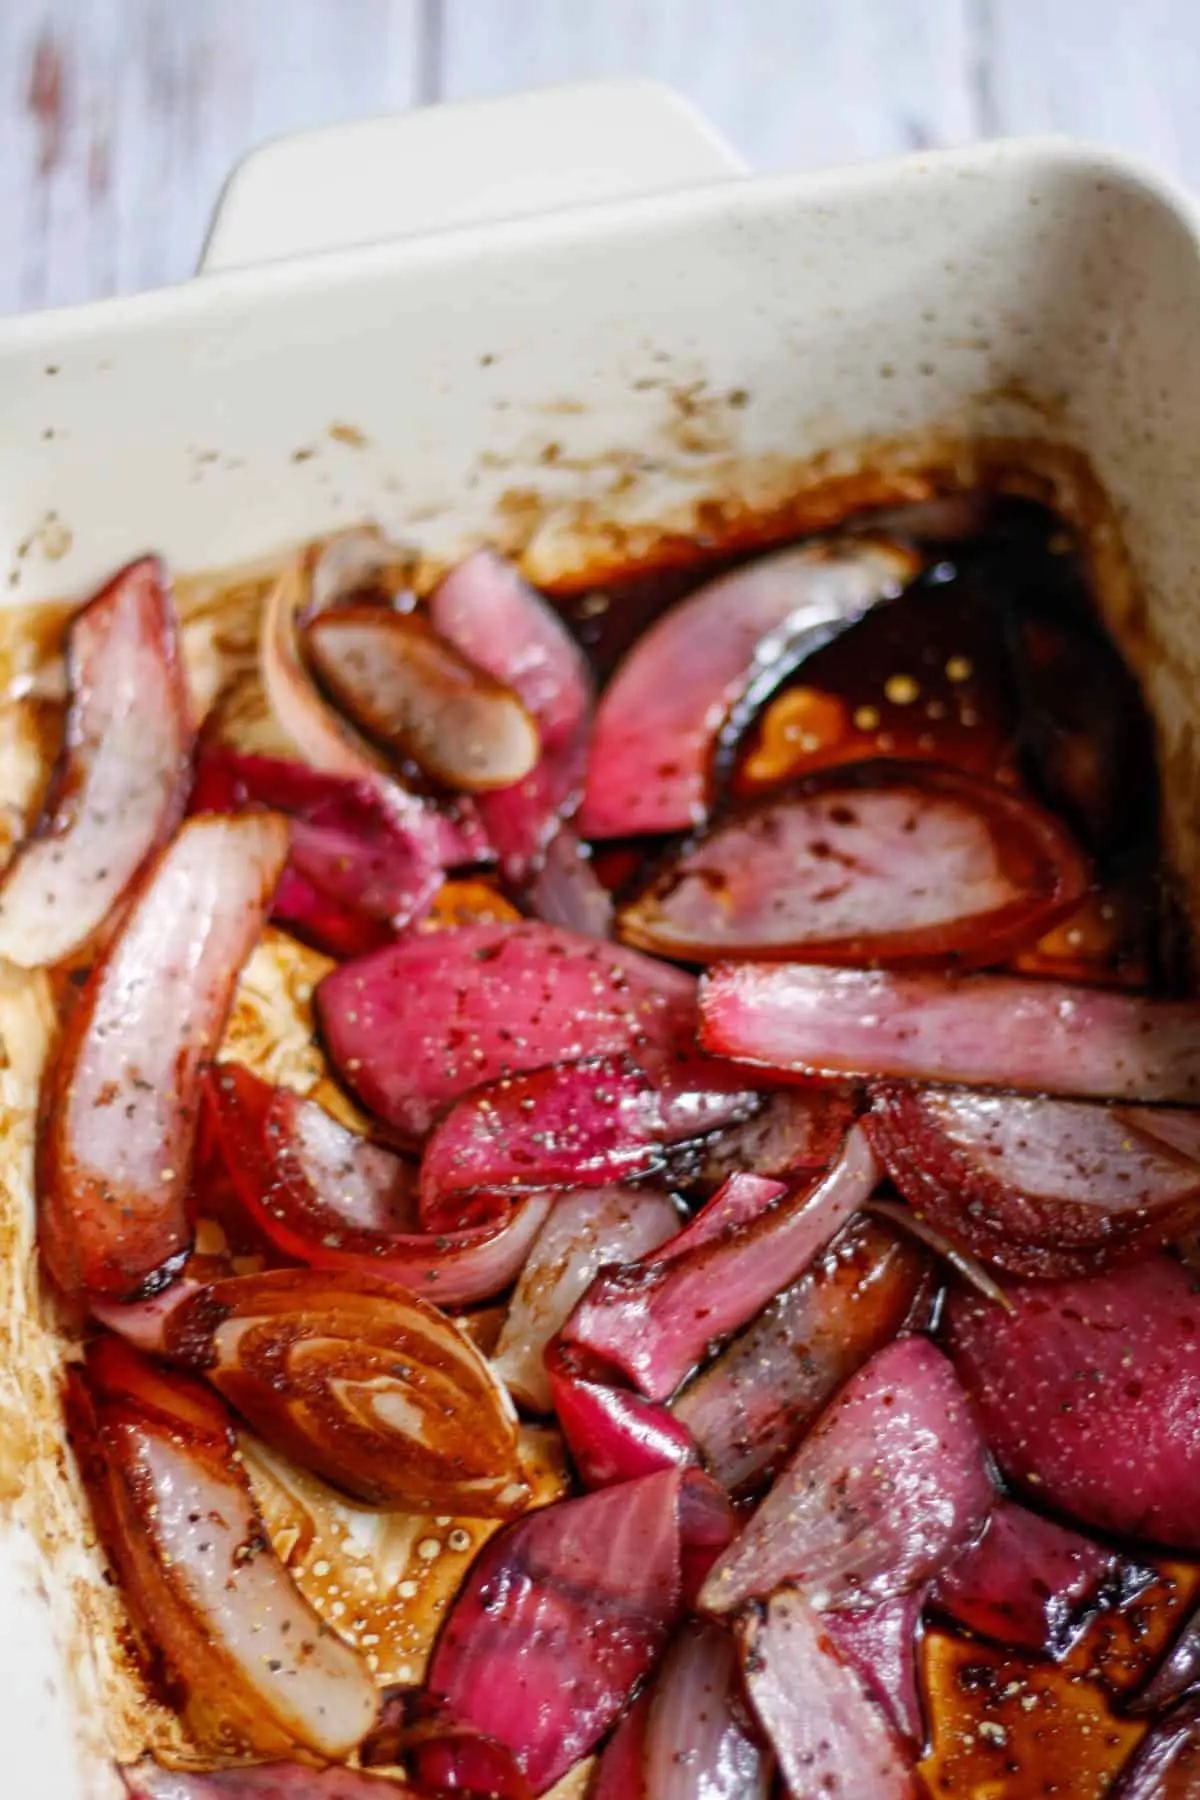 A casserole dish containing roasted red onions in balsamic vinegar and seasoned with salt and pepper.